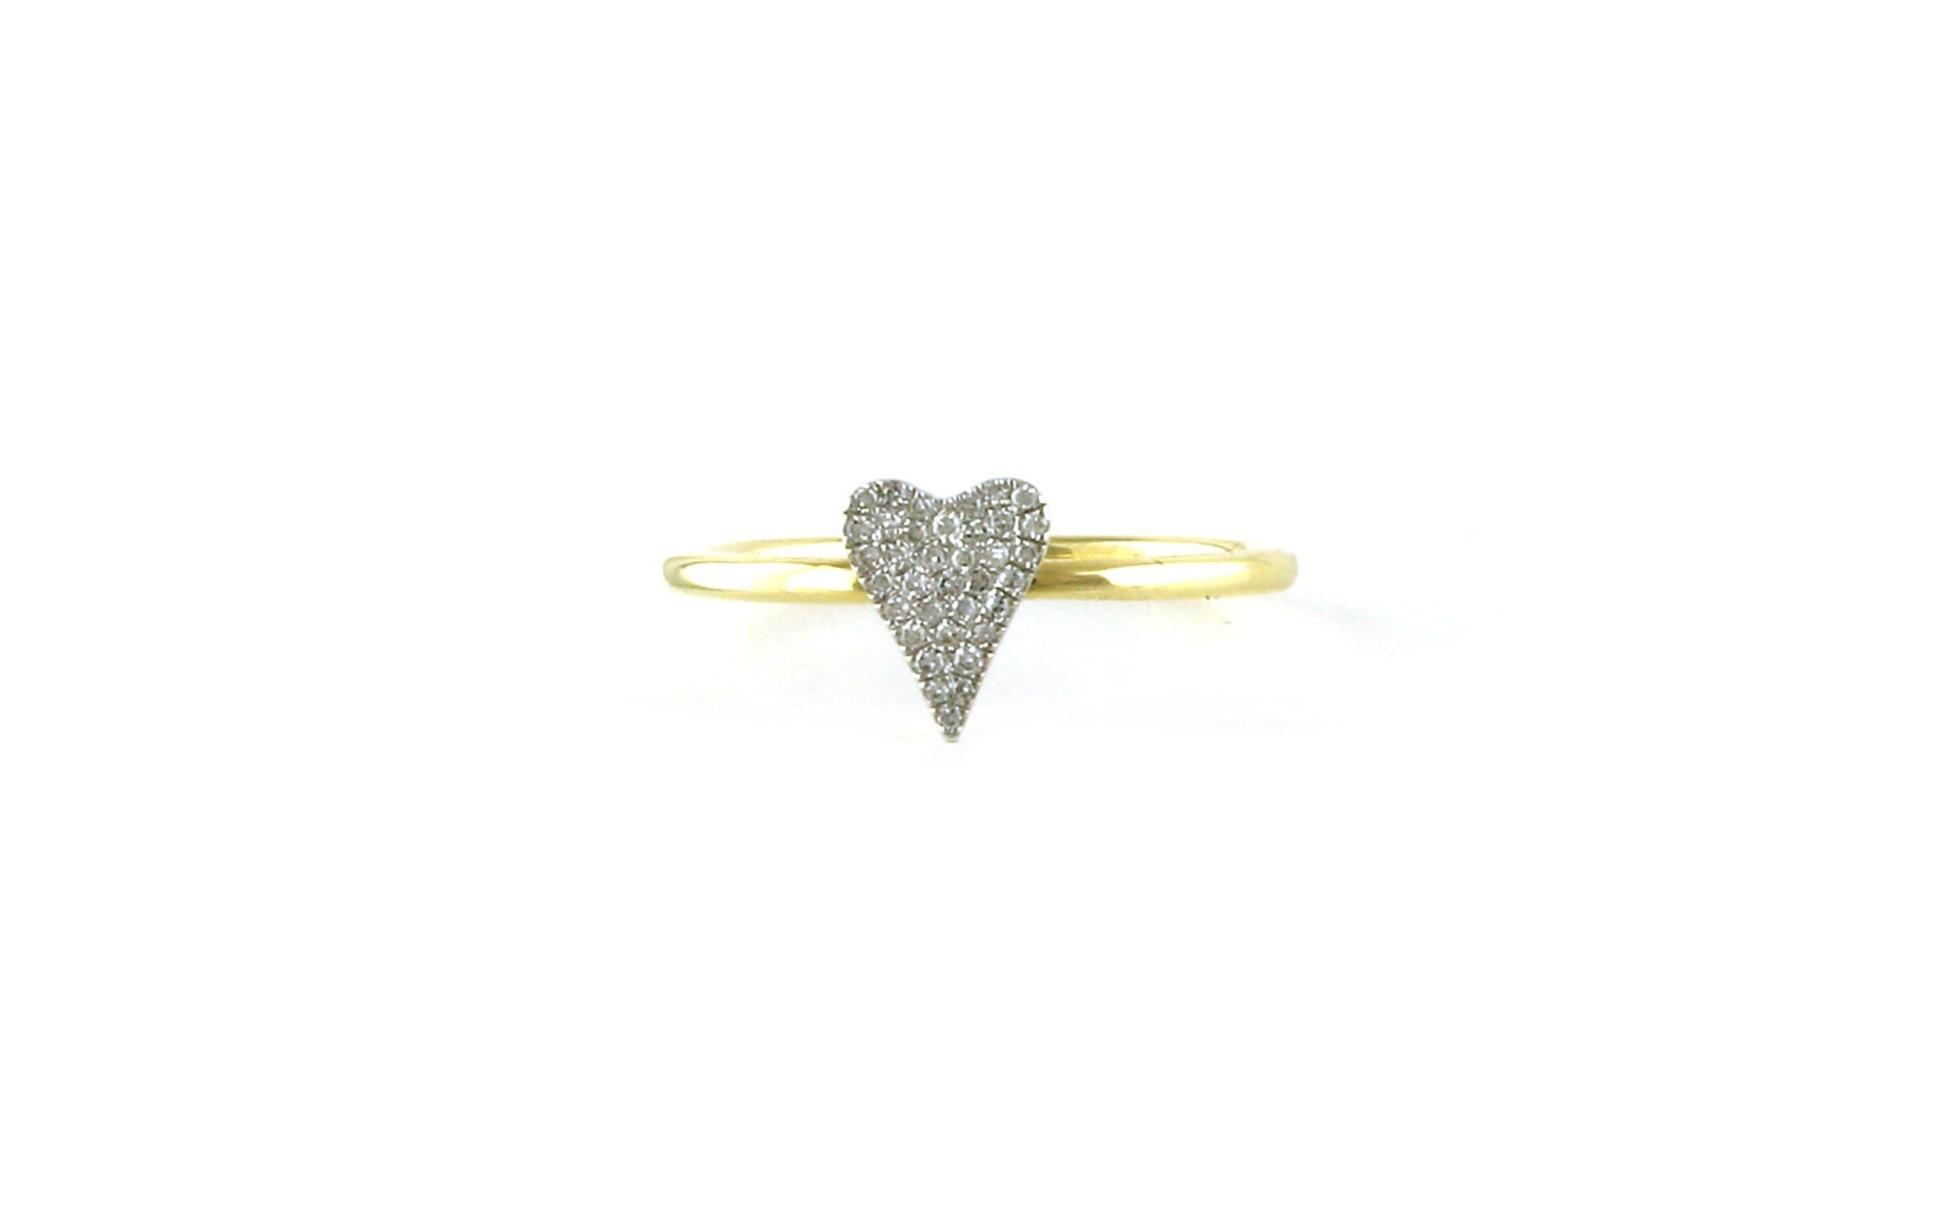 Heart Pave Diamond Ring in Two-tone Yellow and White Gold (0.08cts TWT)